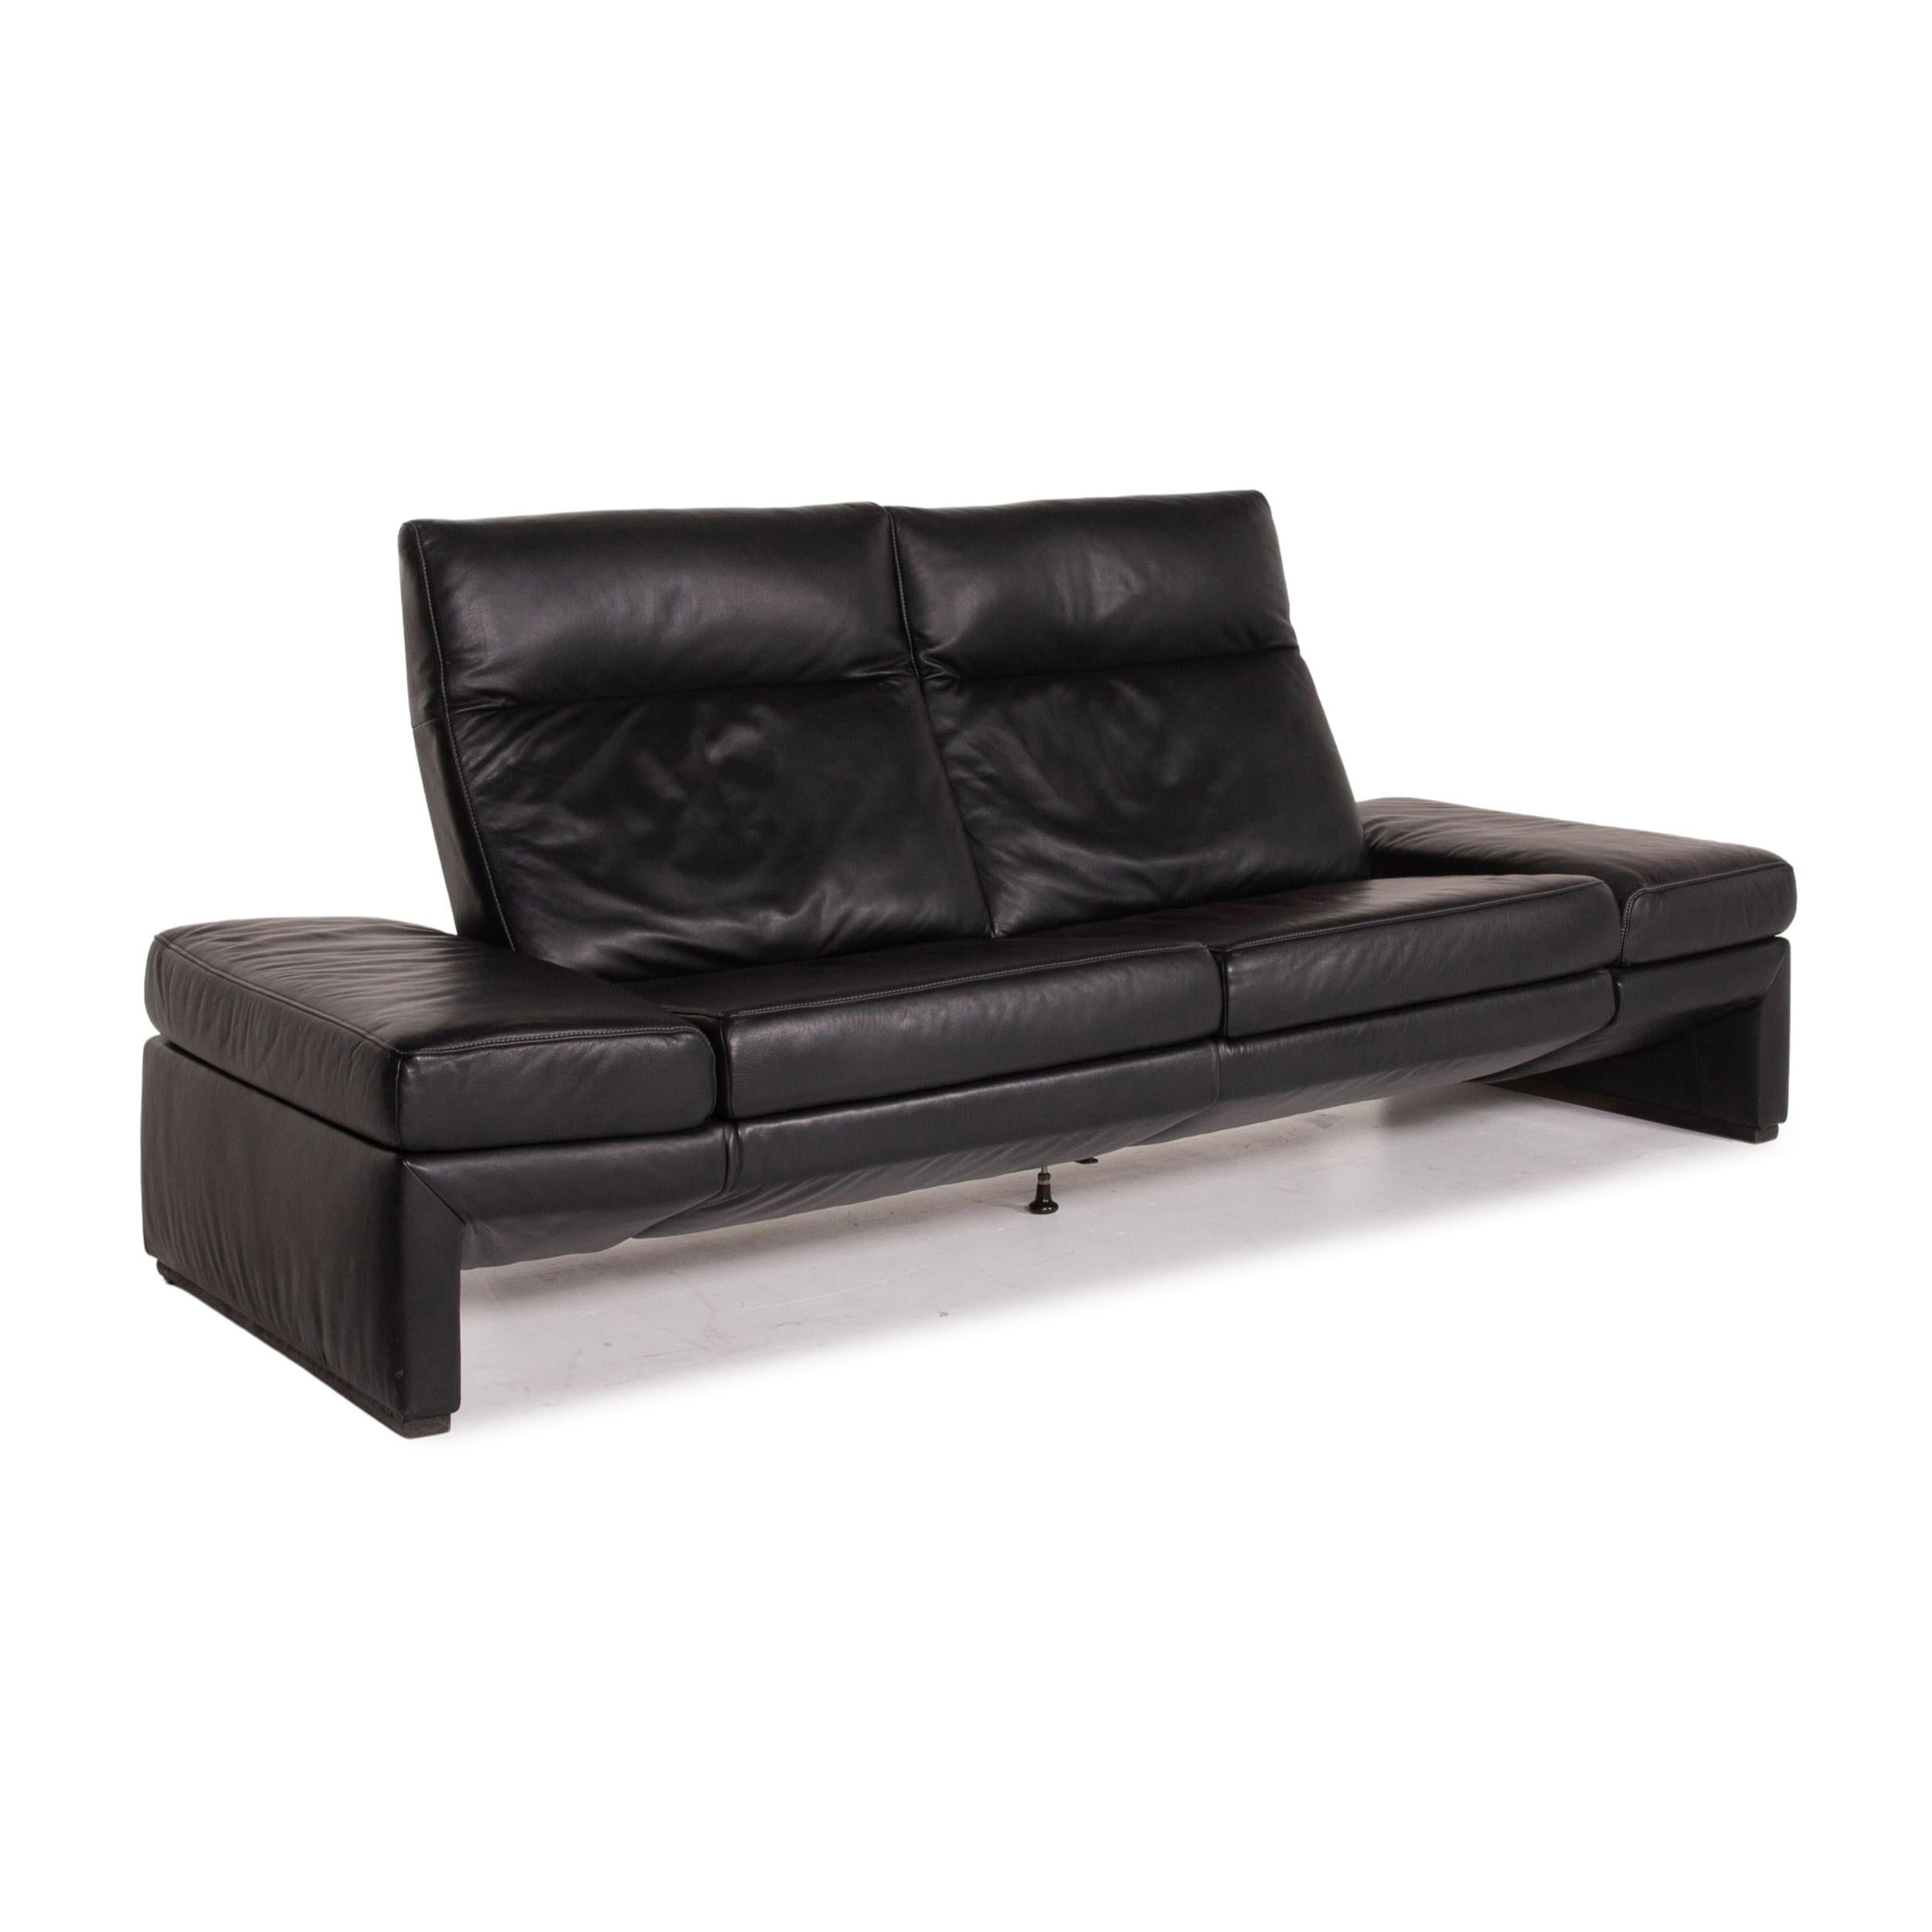 Mondo Leather Sofa Black Three-Seat Electrical Function Relaxation Function 3